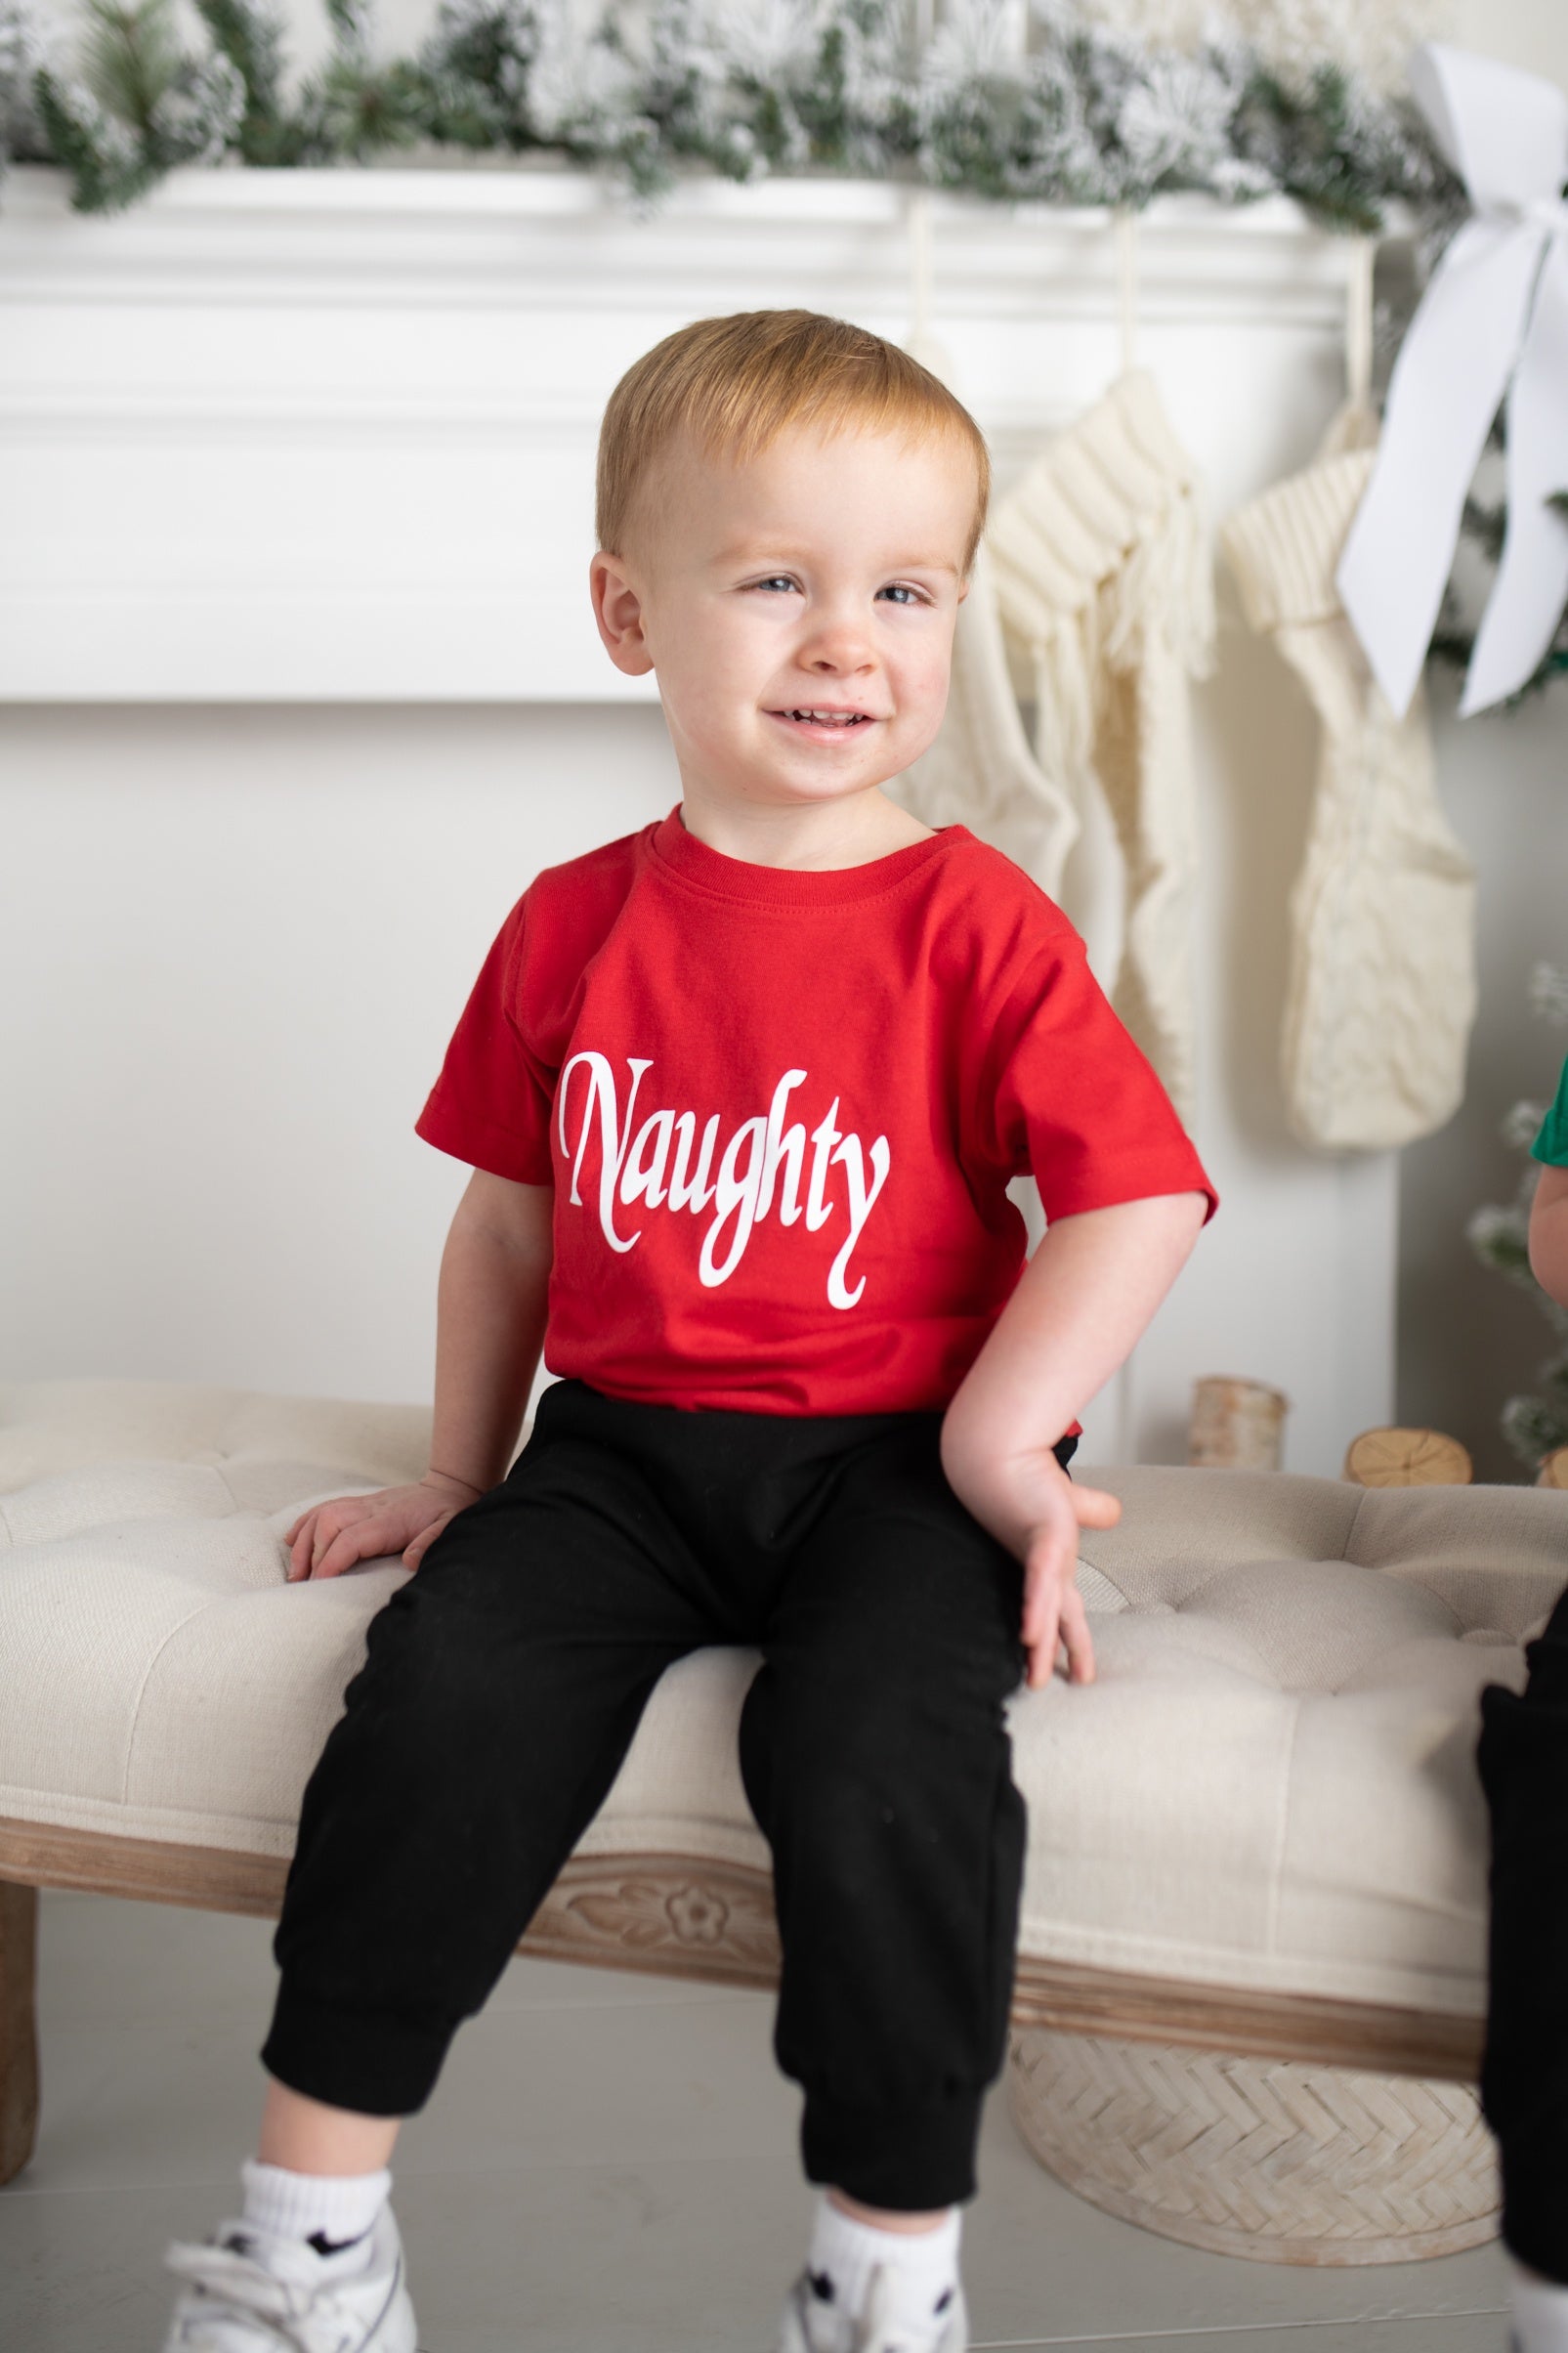 "Naughty" Red Graphic Tee